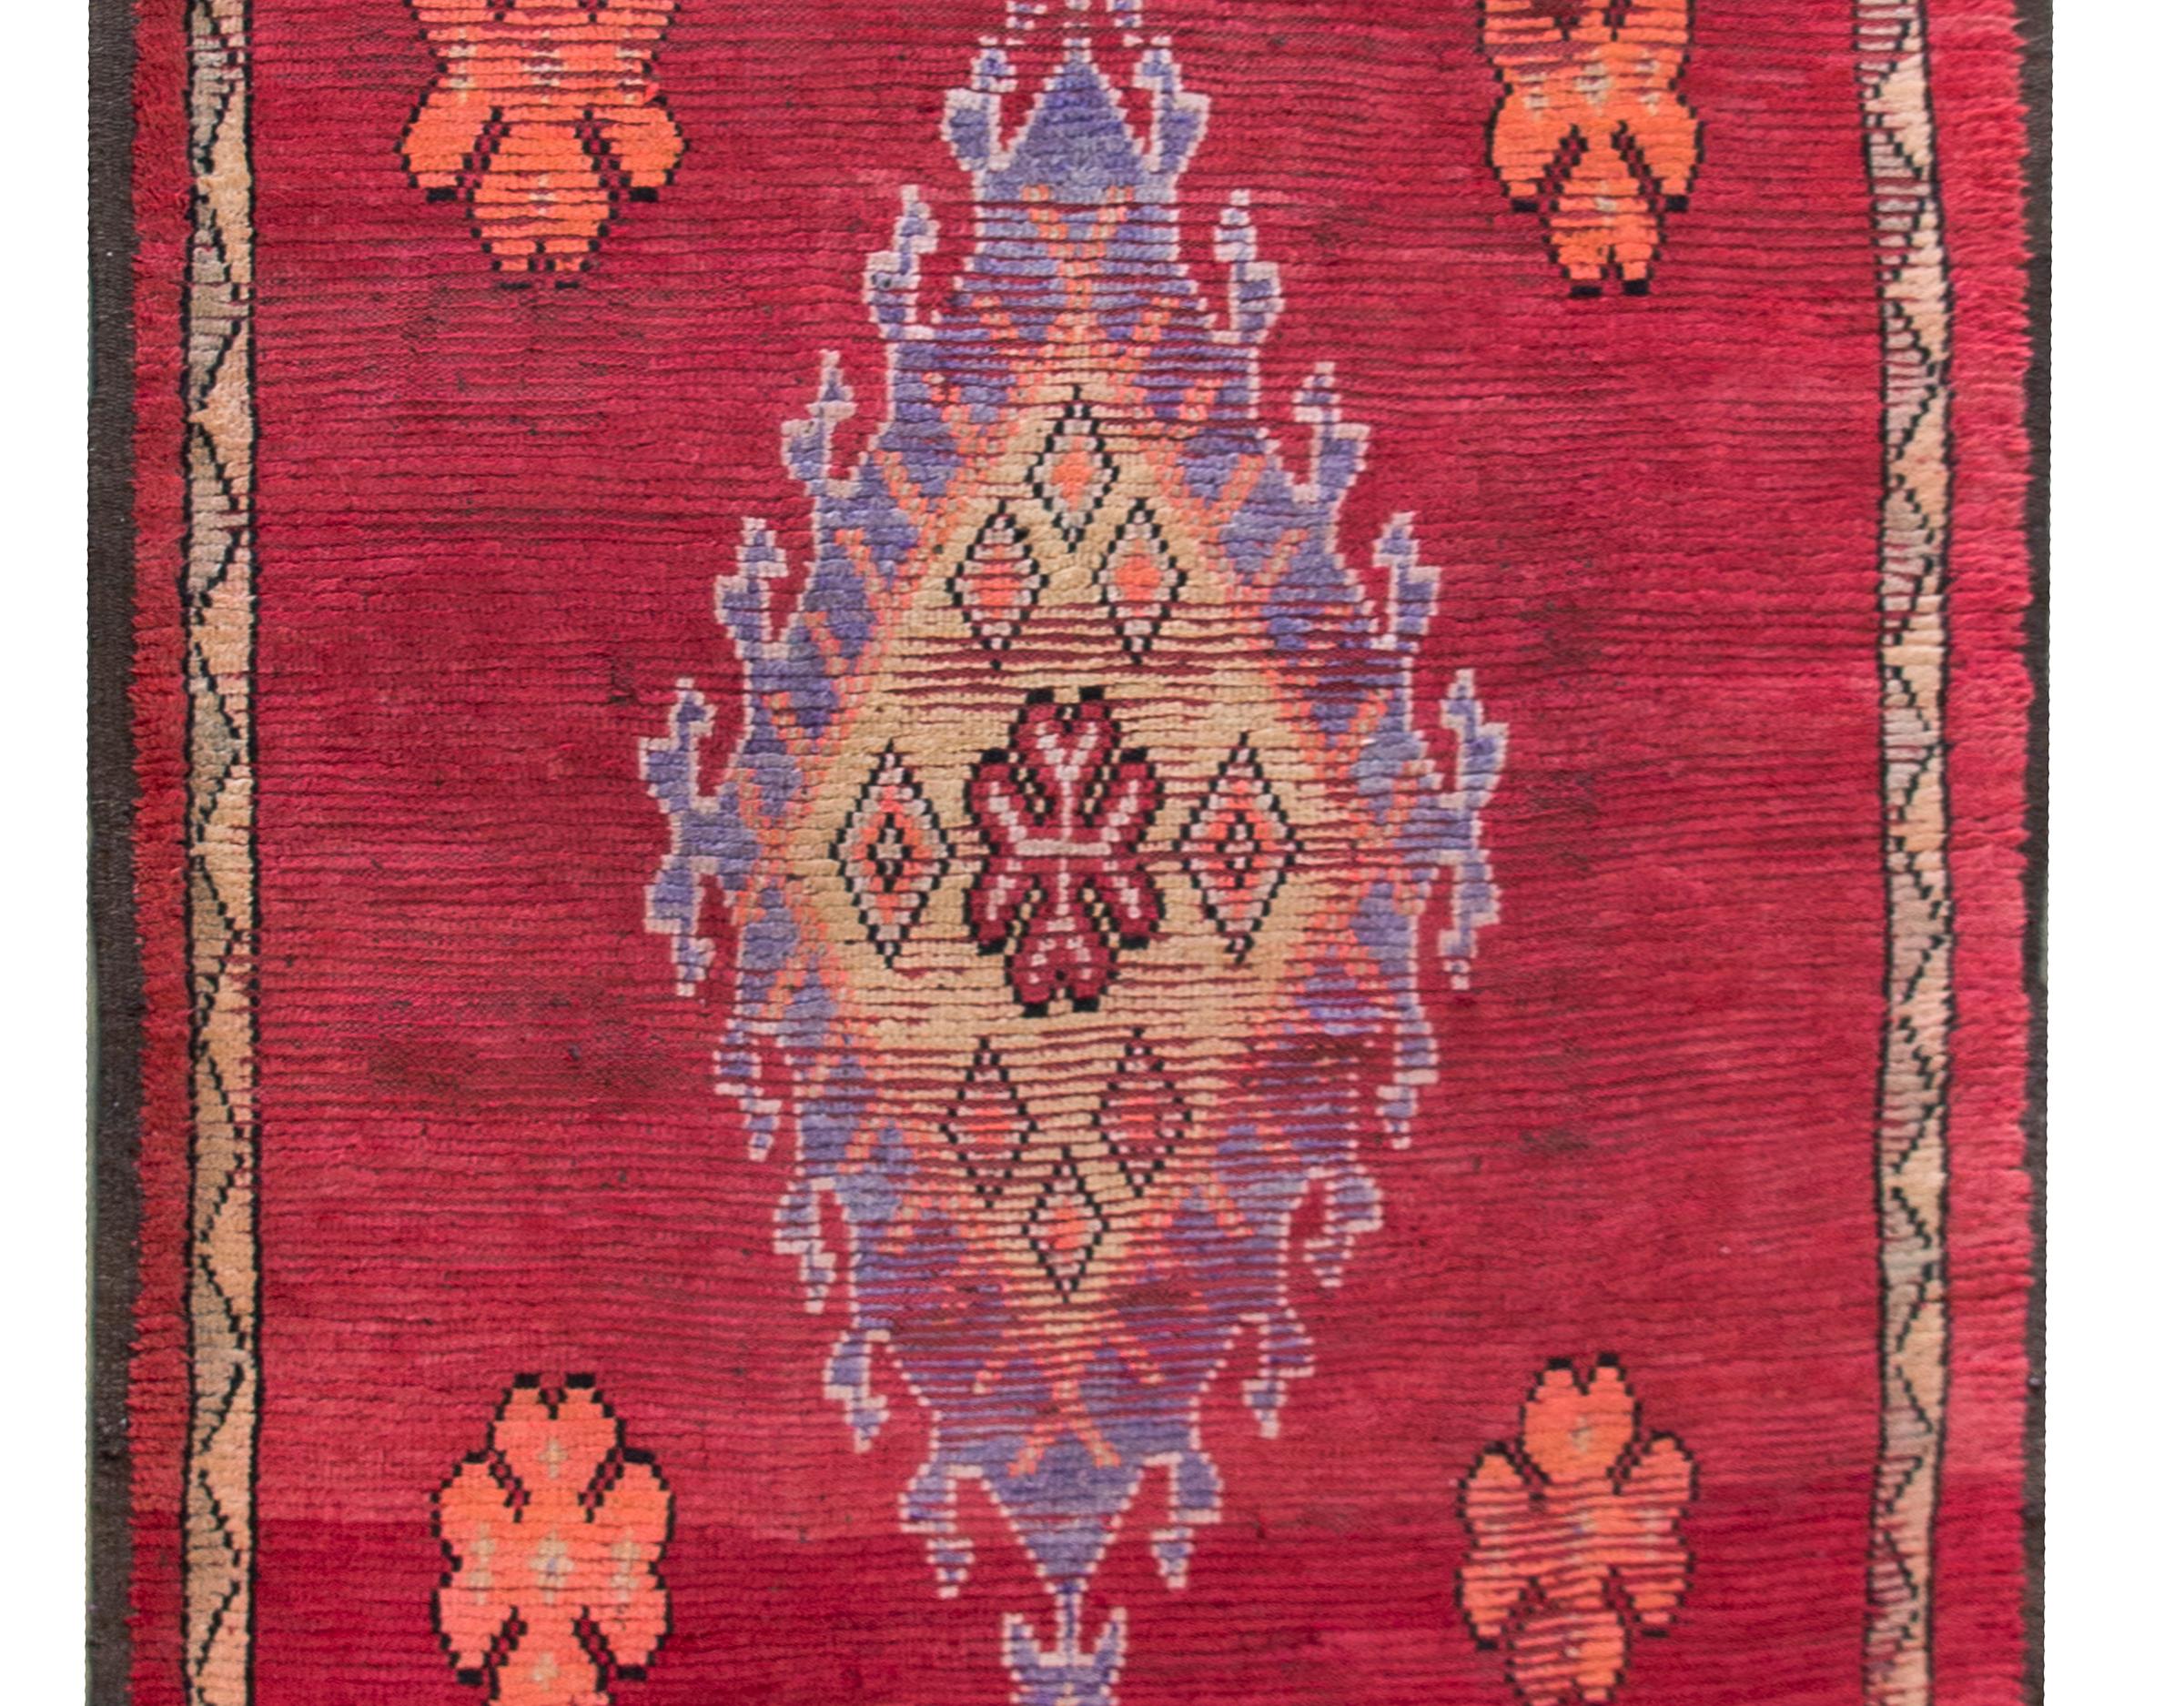 A stunning early 20th century Moroccan Berber runner with a large central diamond medallion amidst a rich crimson field of more stylized flowers woven in orange, gold, violet, and pink, and surrounded by a thin geometric patterned stripe.